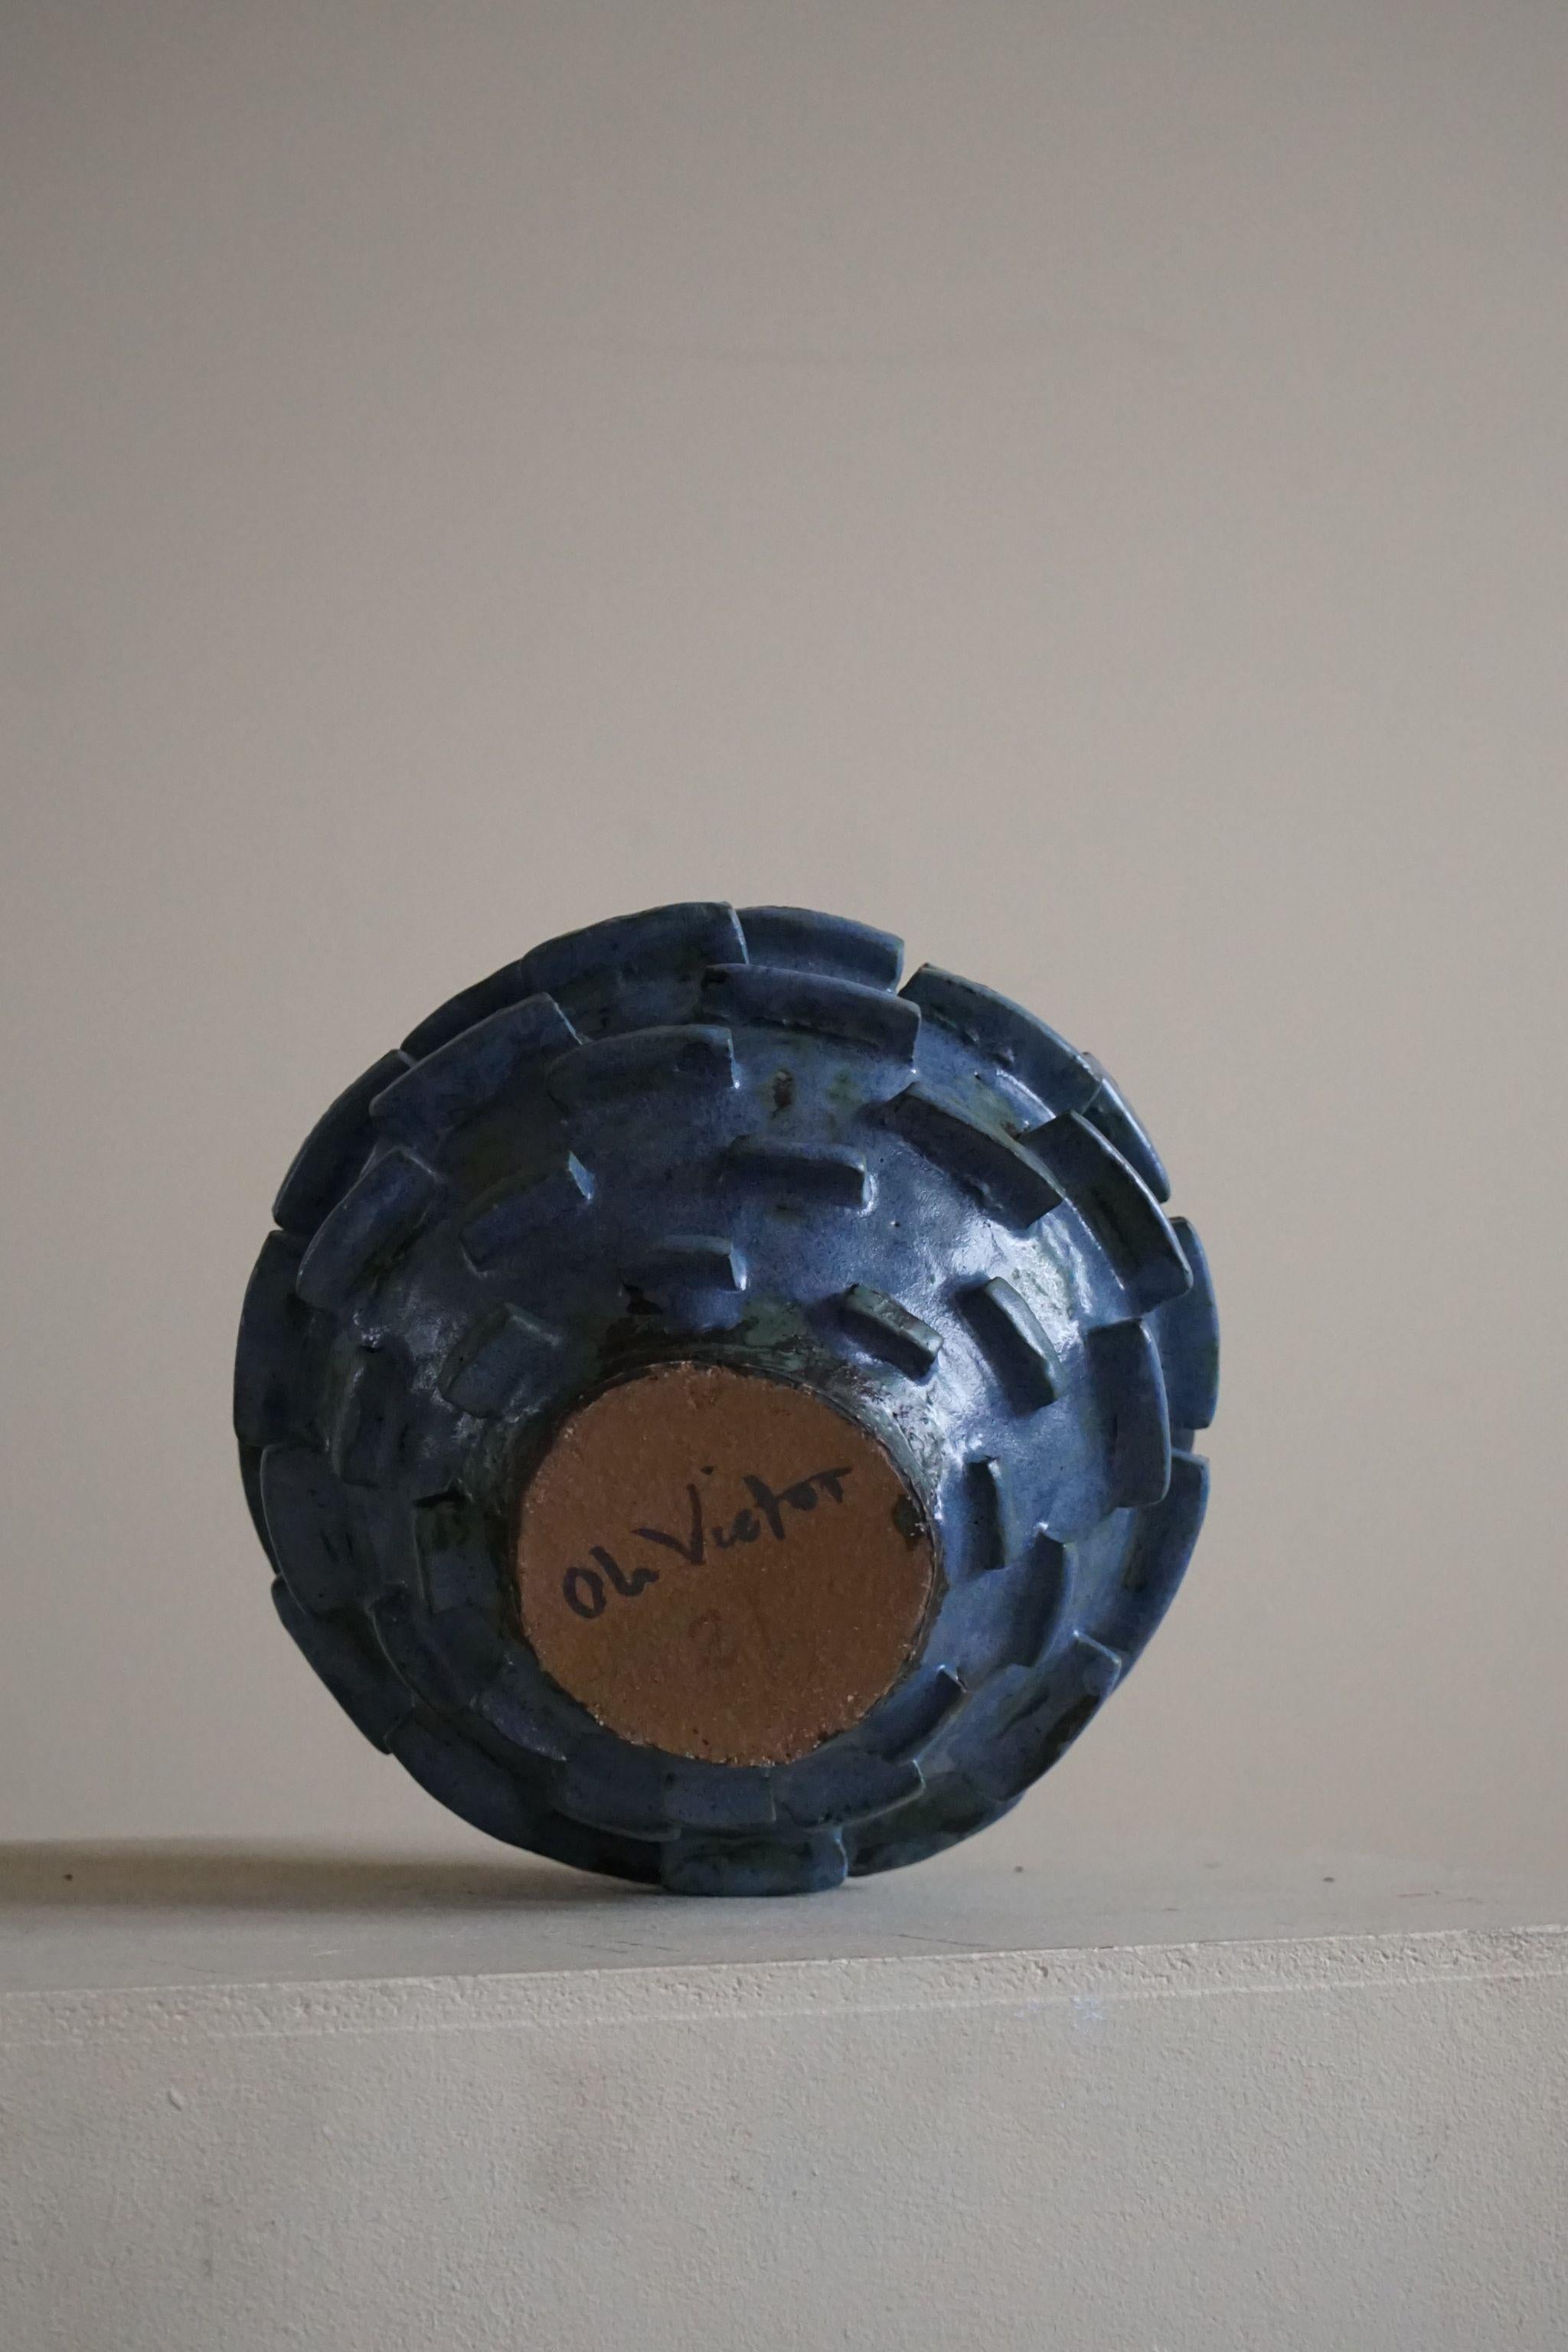 Hand-Crafted Ceramic, Stoneware Vase in Blue / Green Glaze by Danish Artist Ole Victor, 2021